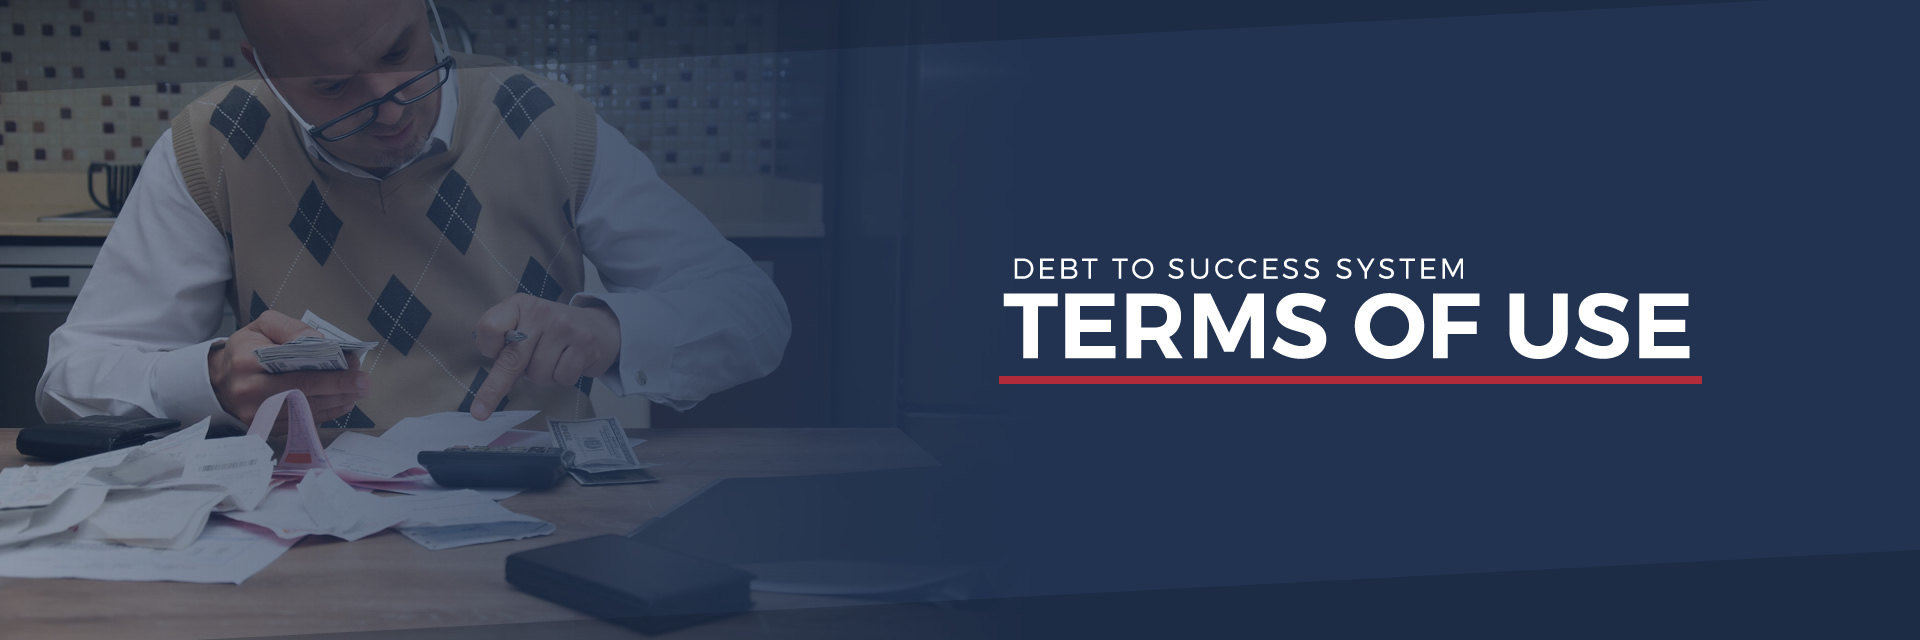 Debt to Success System - DTSS Terms